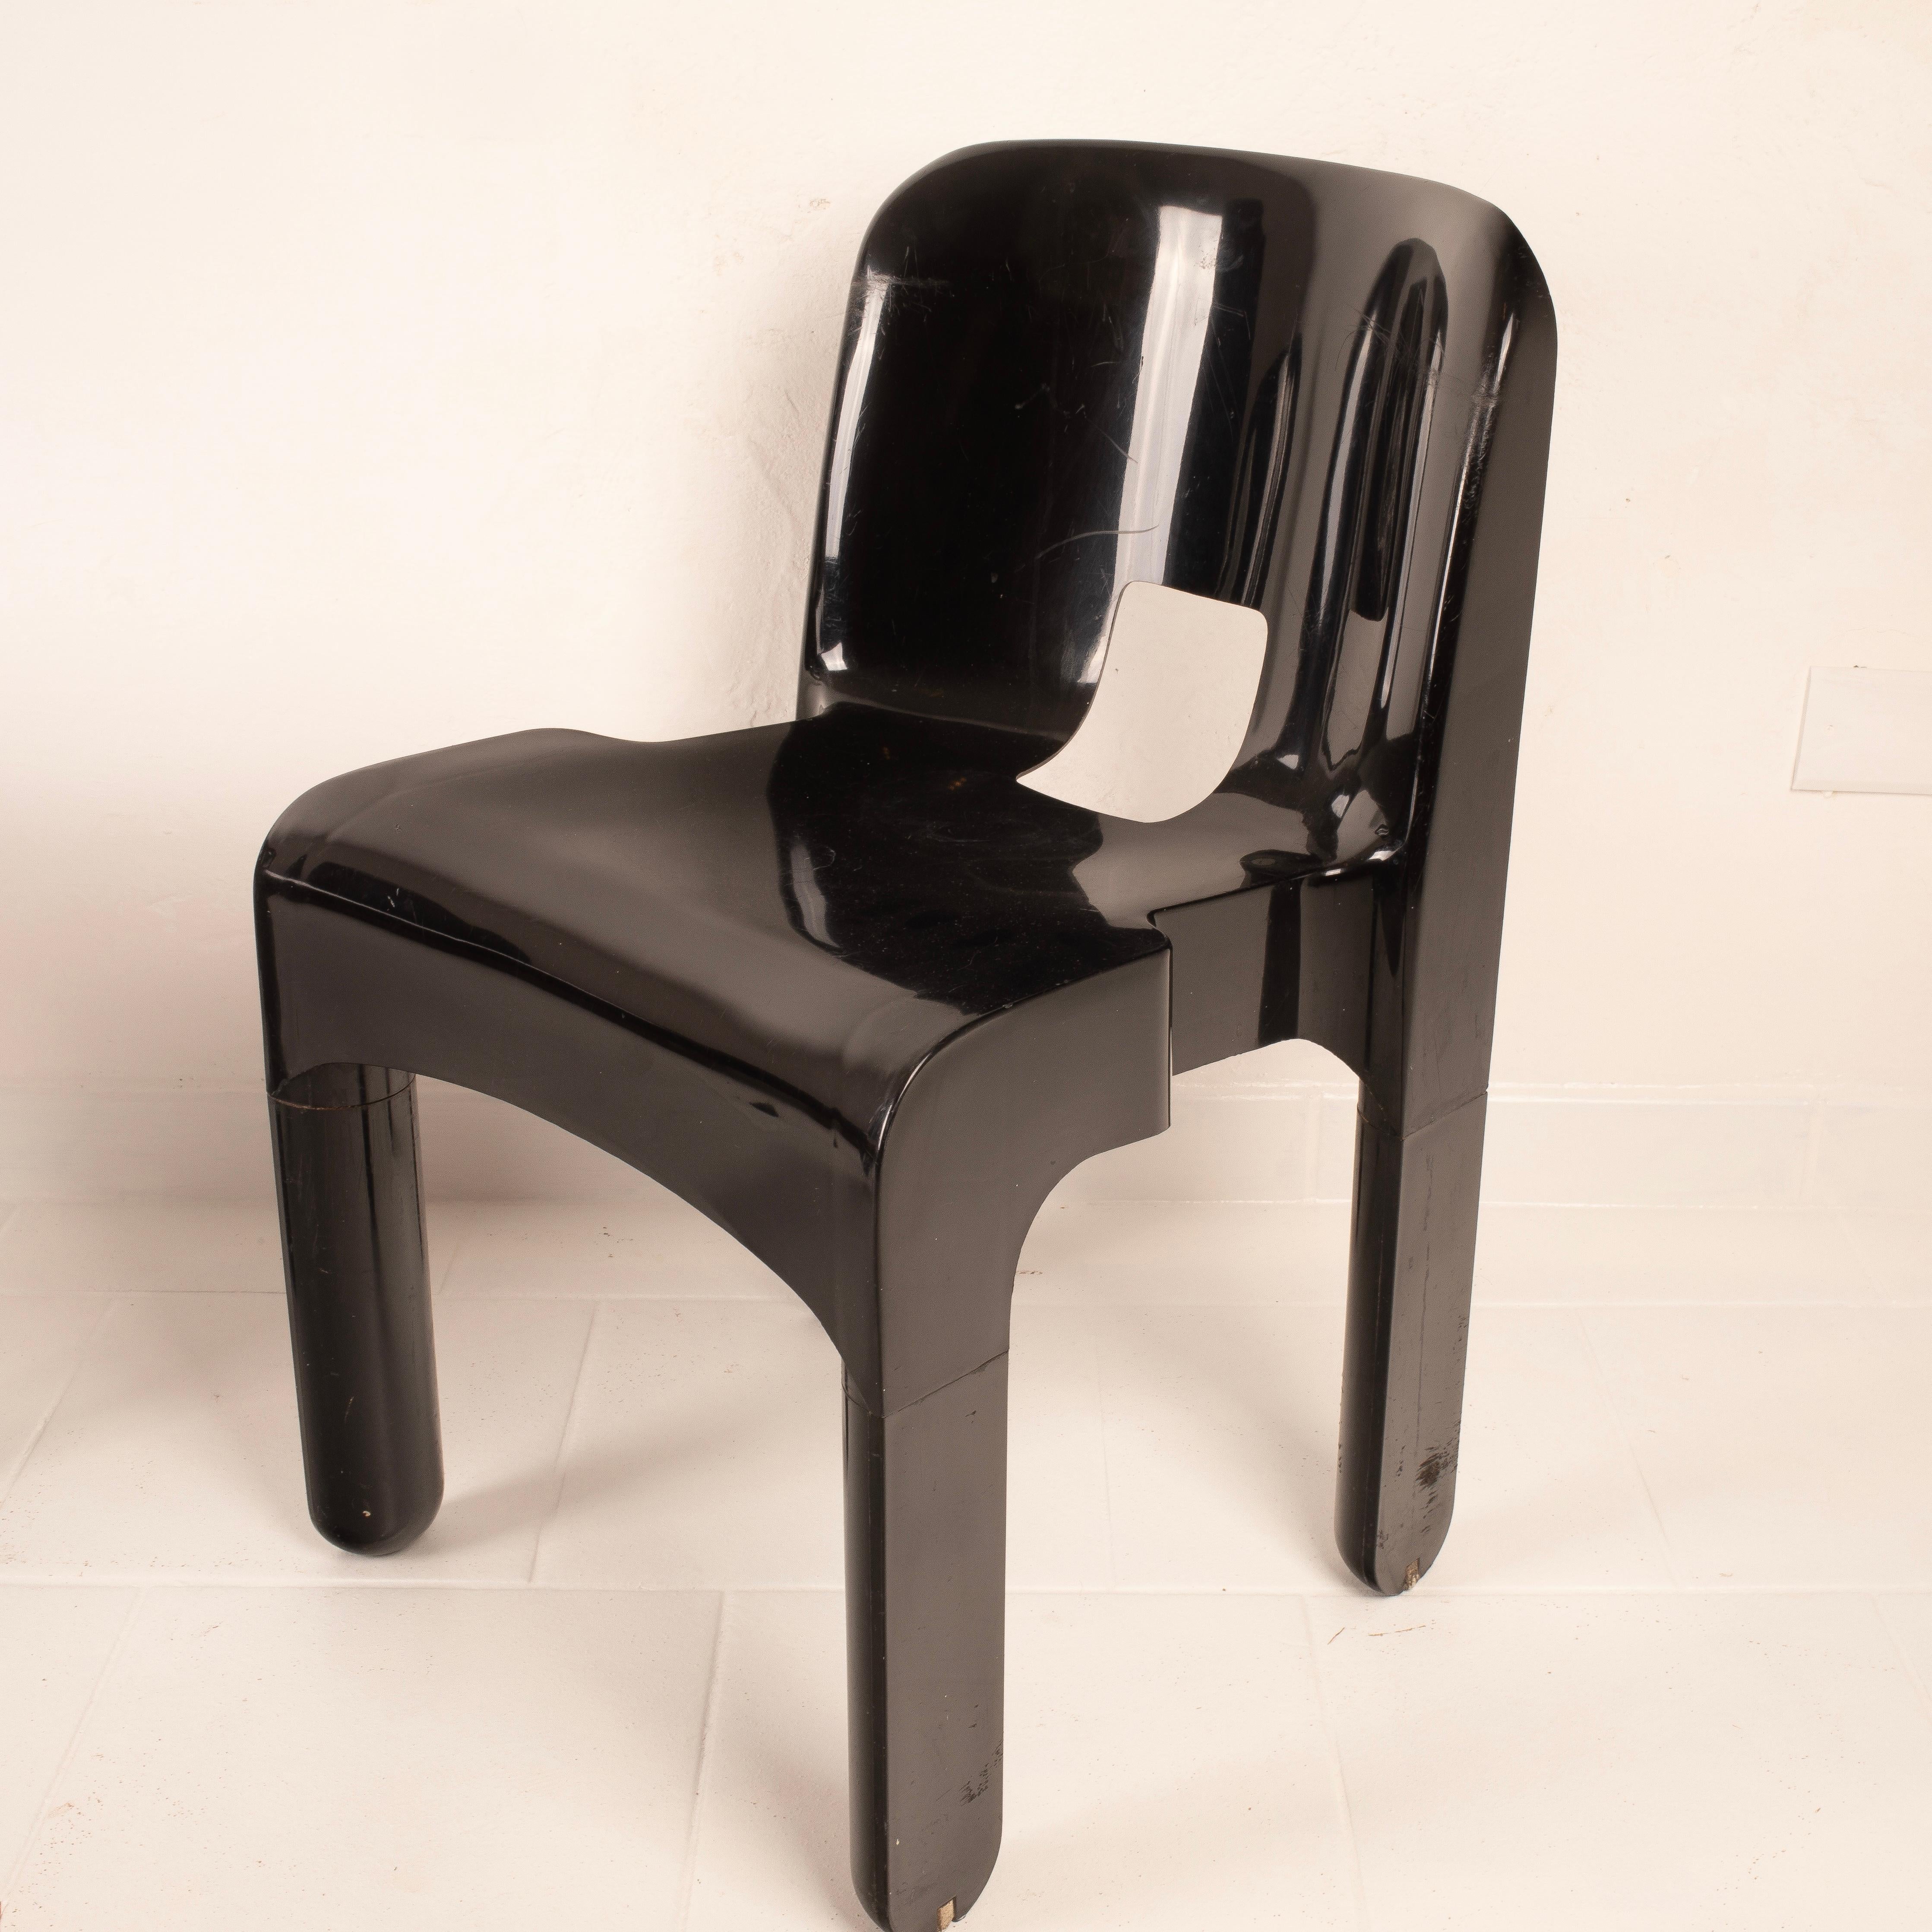 Mid-20th Century Pair of Universal Chairs 4869 Black by Joe Colombo for Kartell For Sale